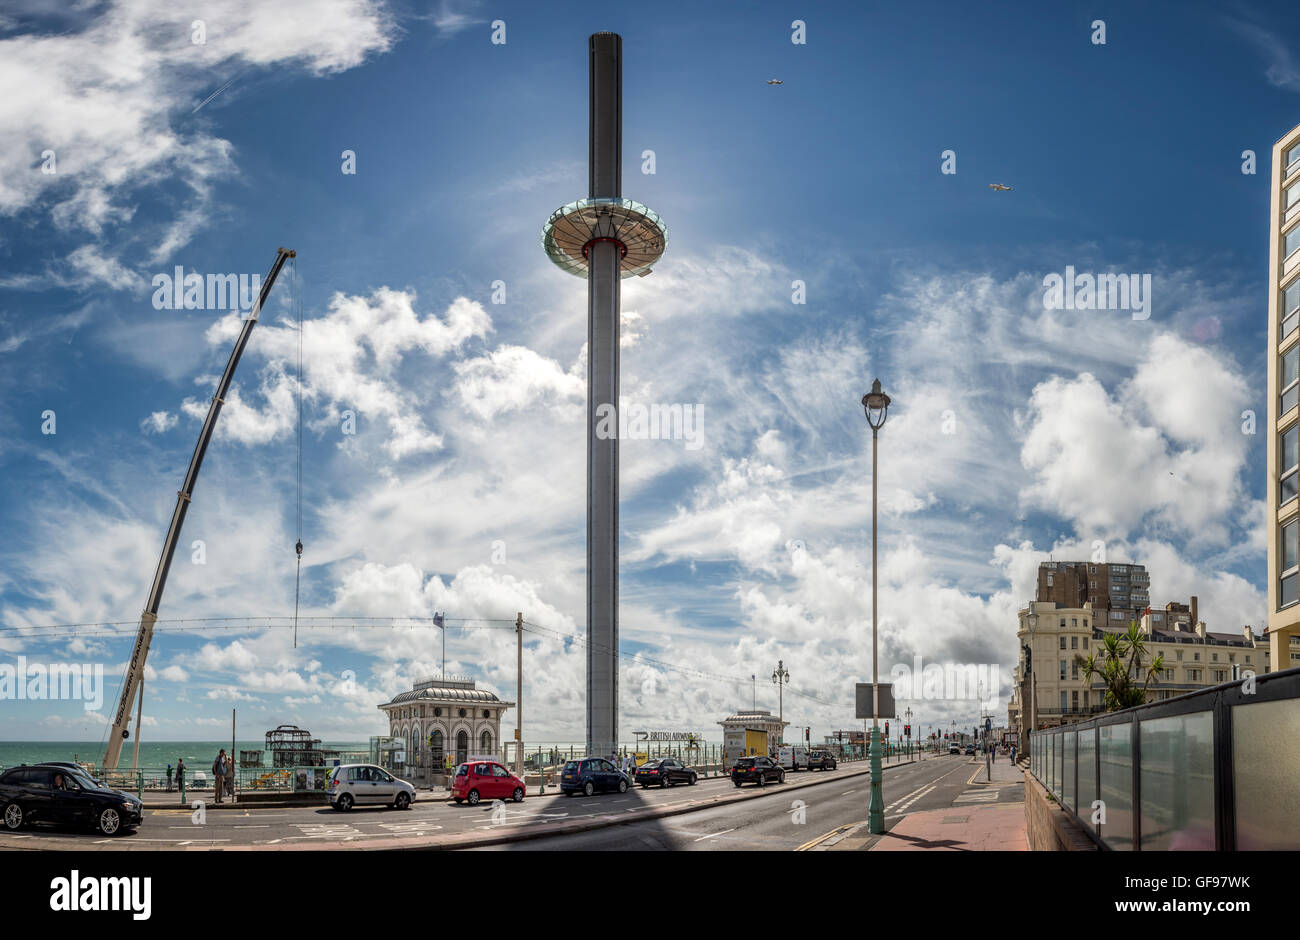 The British Airways i360 tower on Brighton seafront, opening to the public on August 4th. Stock Photo